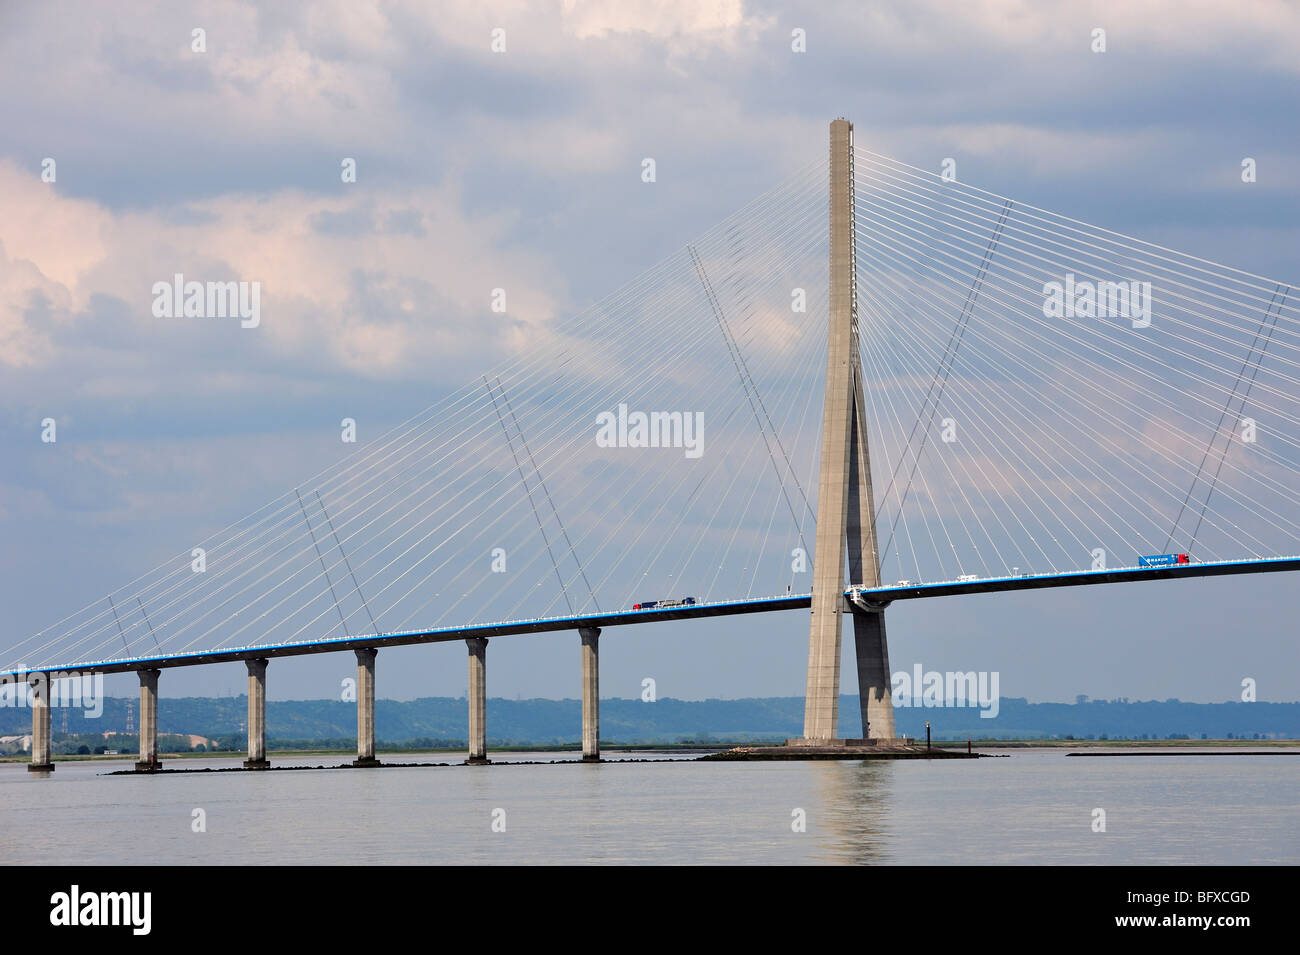 Pont de Normandie / Bridge of Normandy, a cable-stayed road bridge over the river Seine linking Le Havre to Honfleur, Normandy Stock Photo